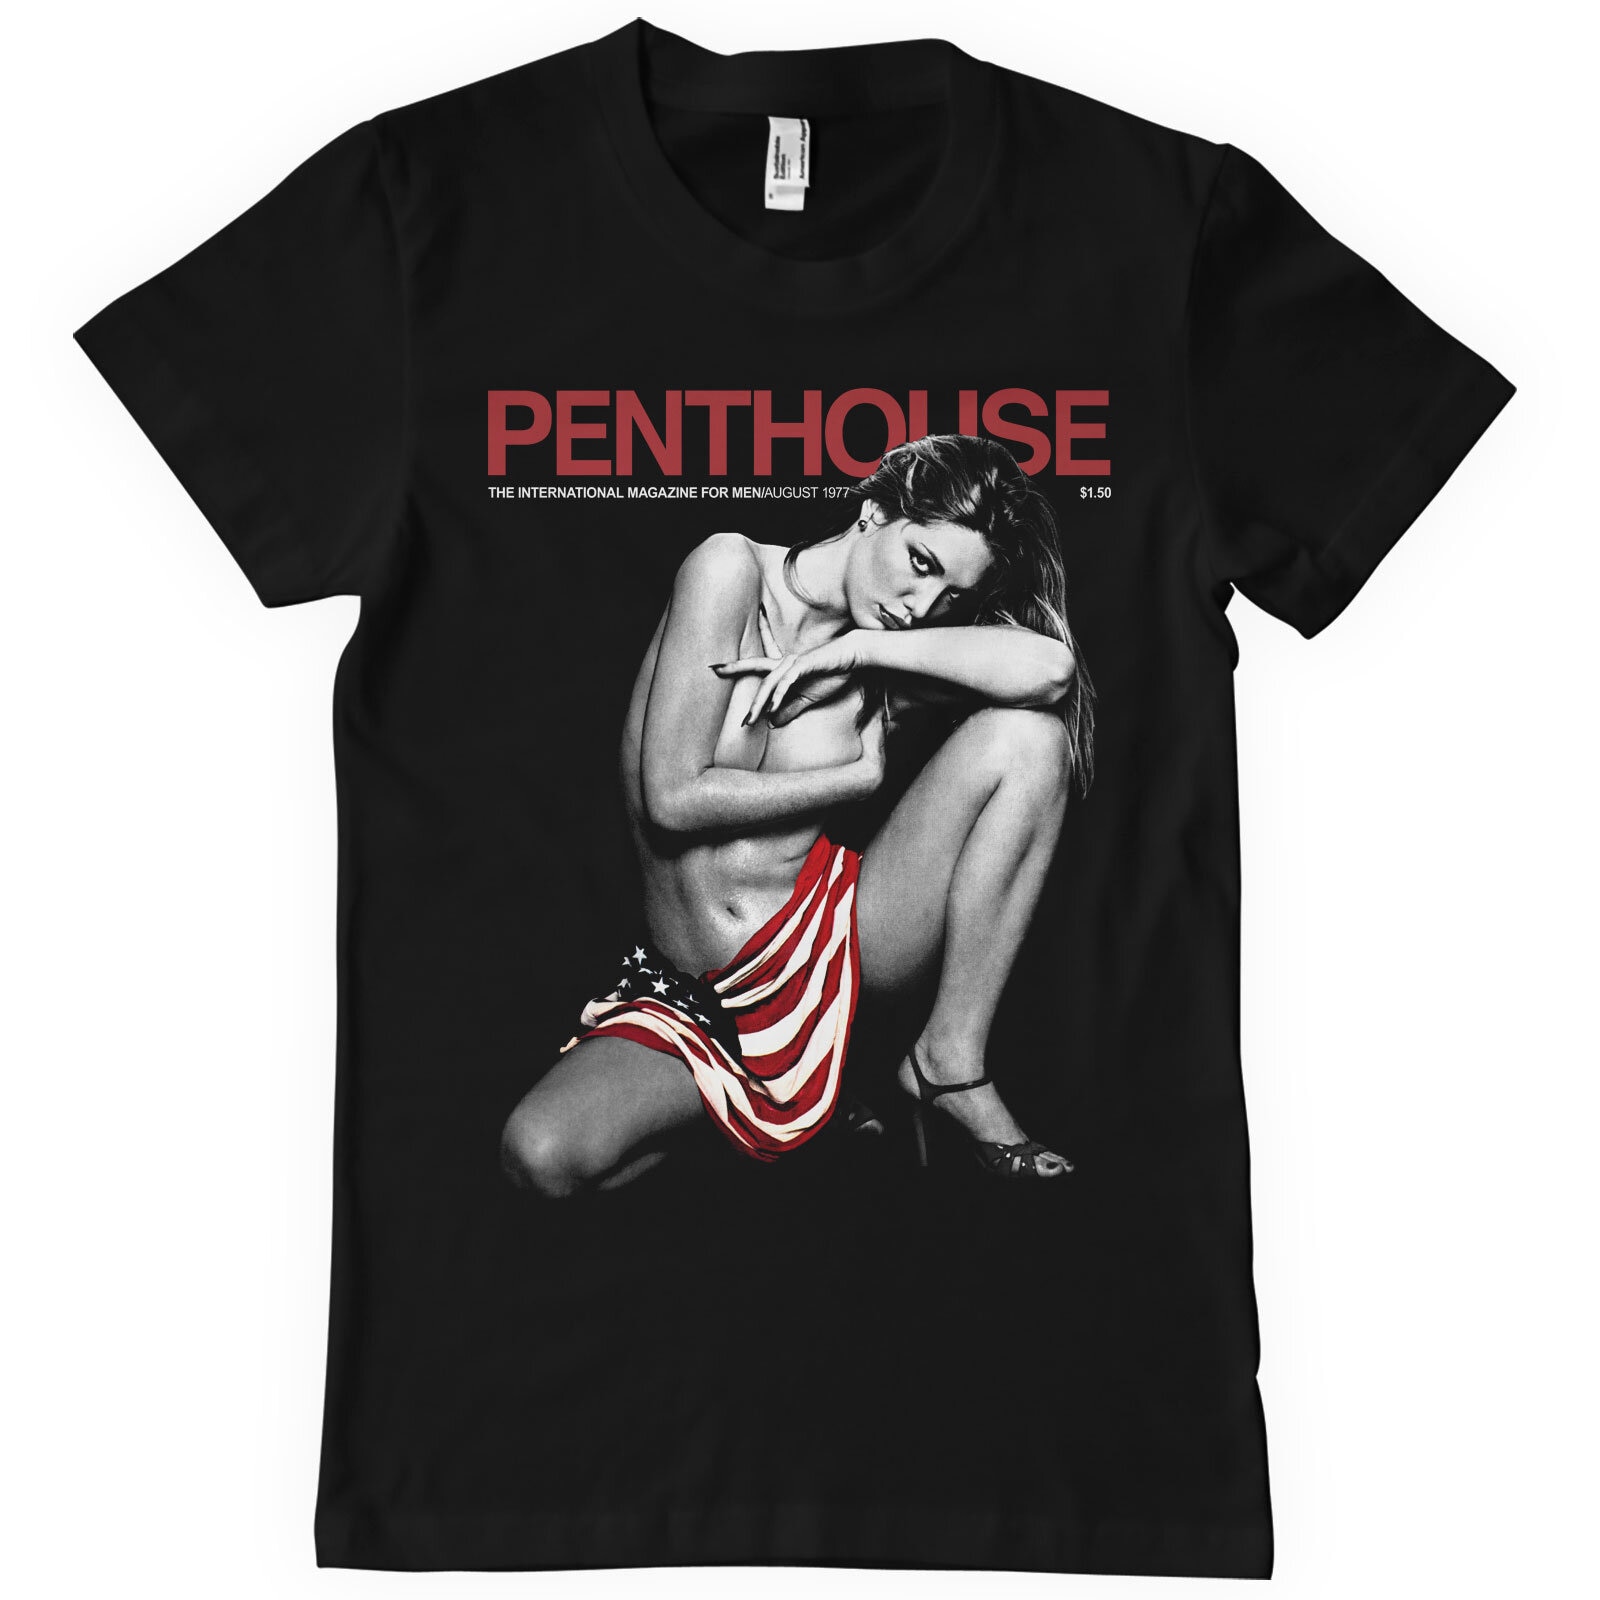 Penthouse October 1977 Cover T-Shirt